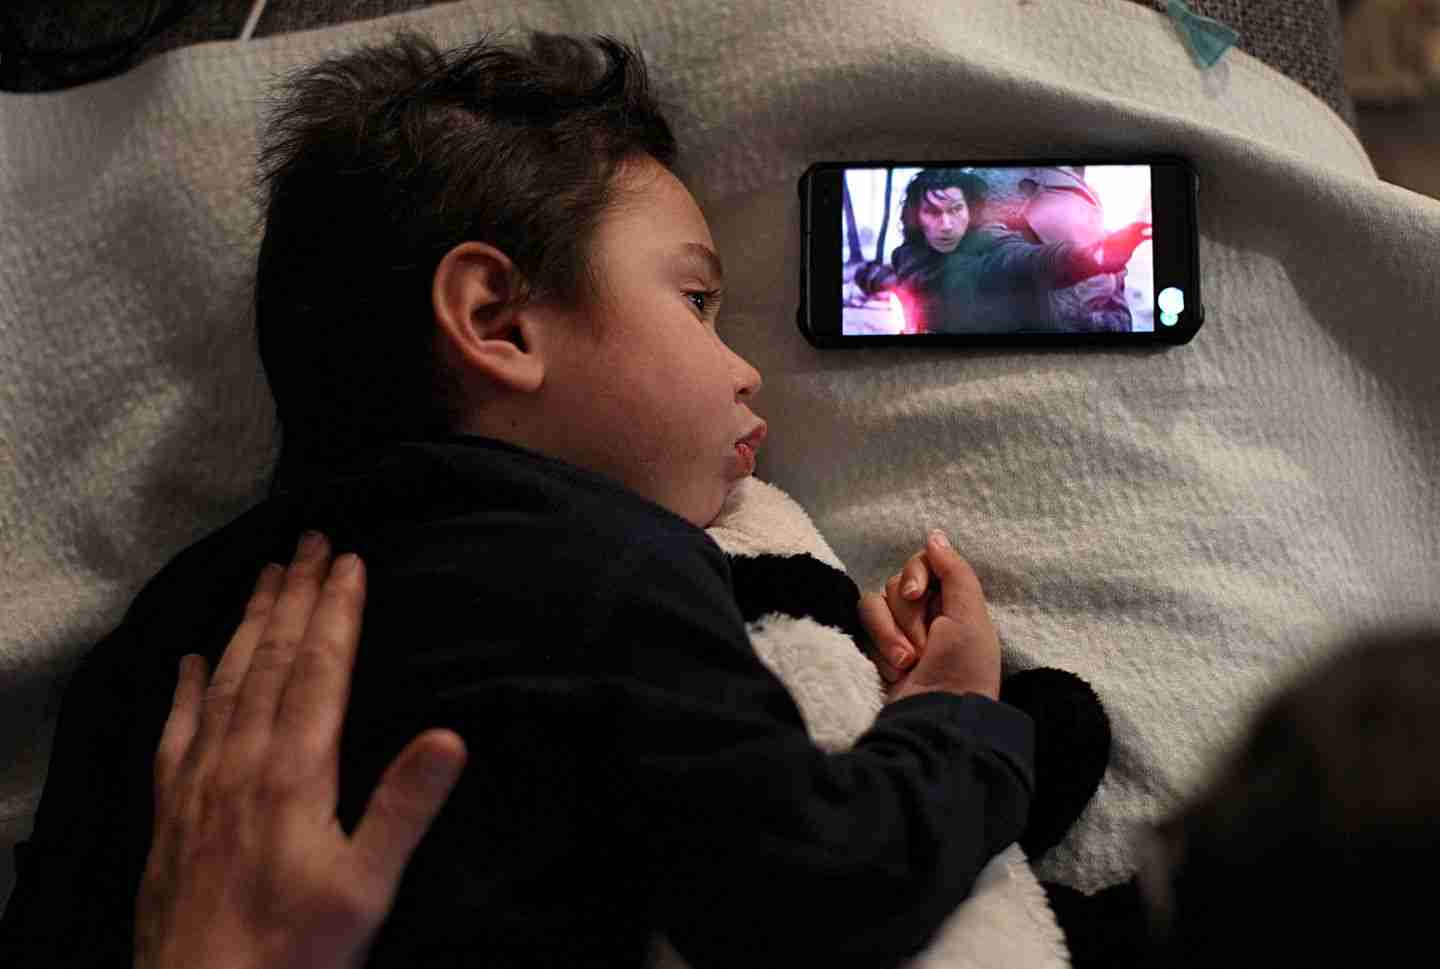 Before his debilitating sickness, Lucas loved to watch Star Wars movies with his father, Nathan, who still props up a phone for Lucas to watch. 